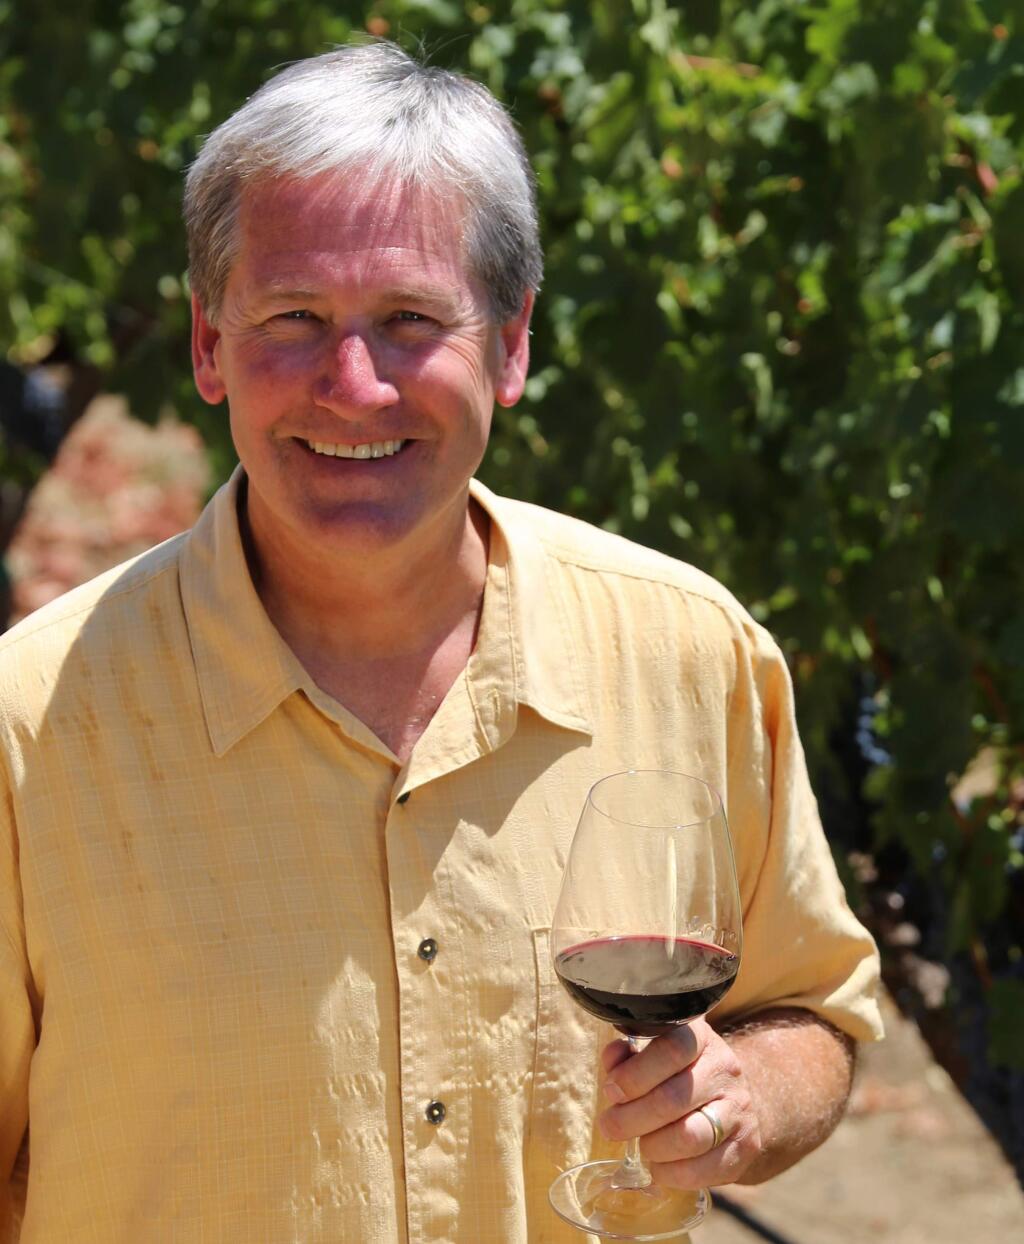 Judd Wallenbrock is named president and CEO of C. Mondavi & Company of St. Helena, effective June 19, 2017. (PROVIDED PHOTO) Feb. 19, 2013